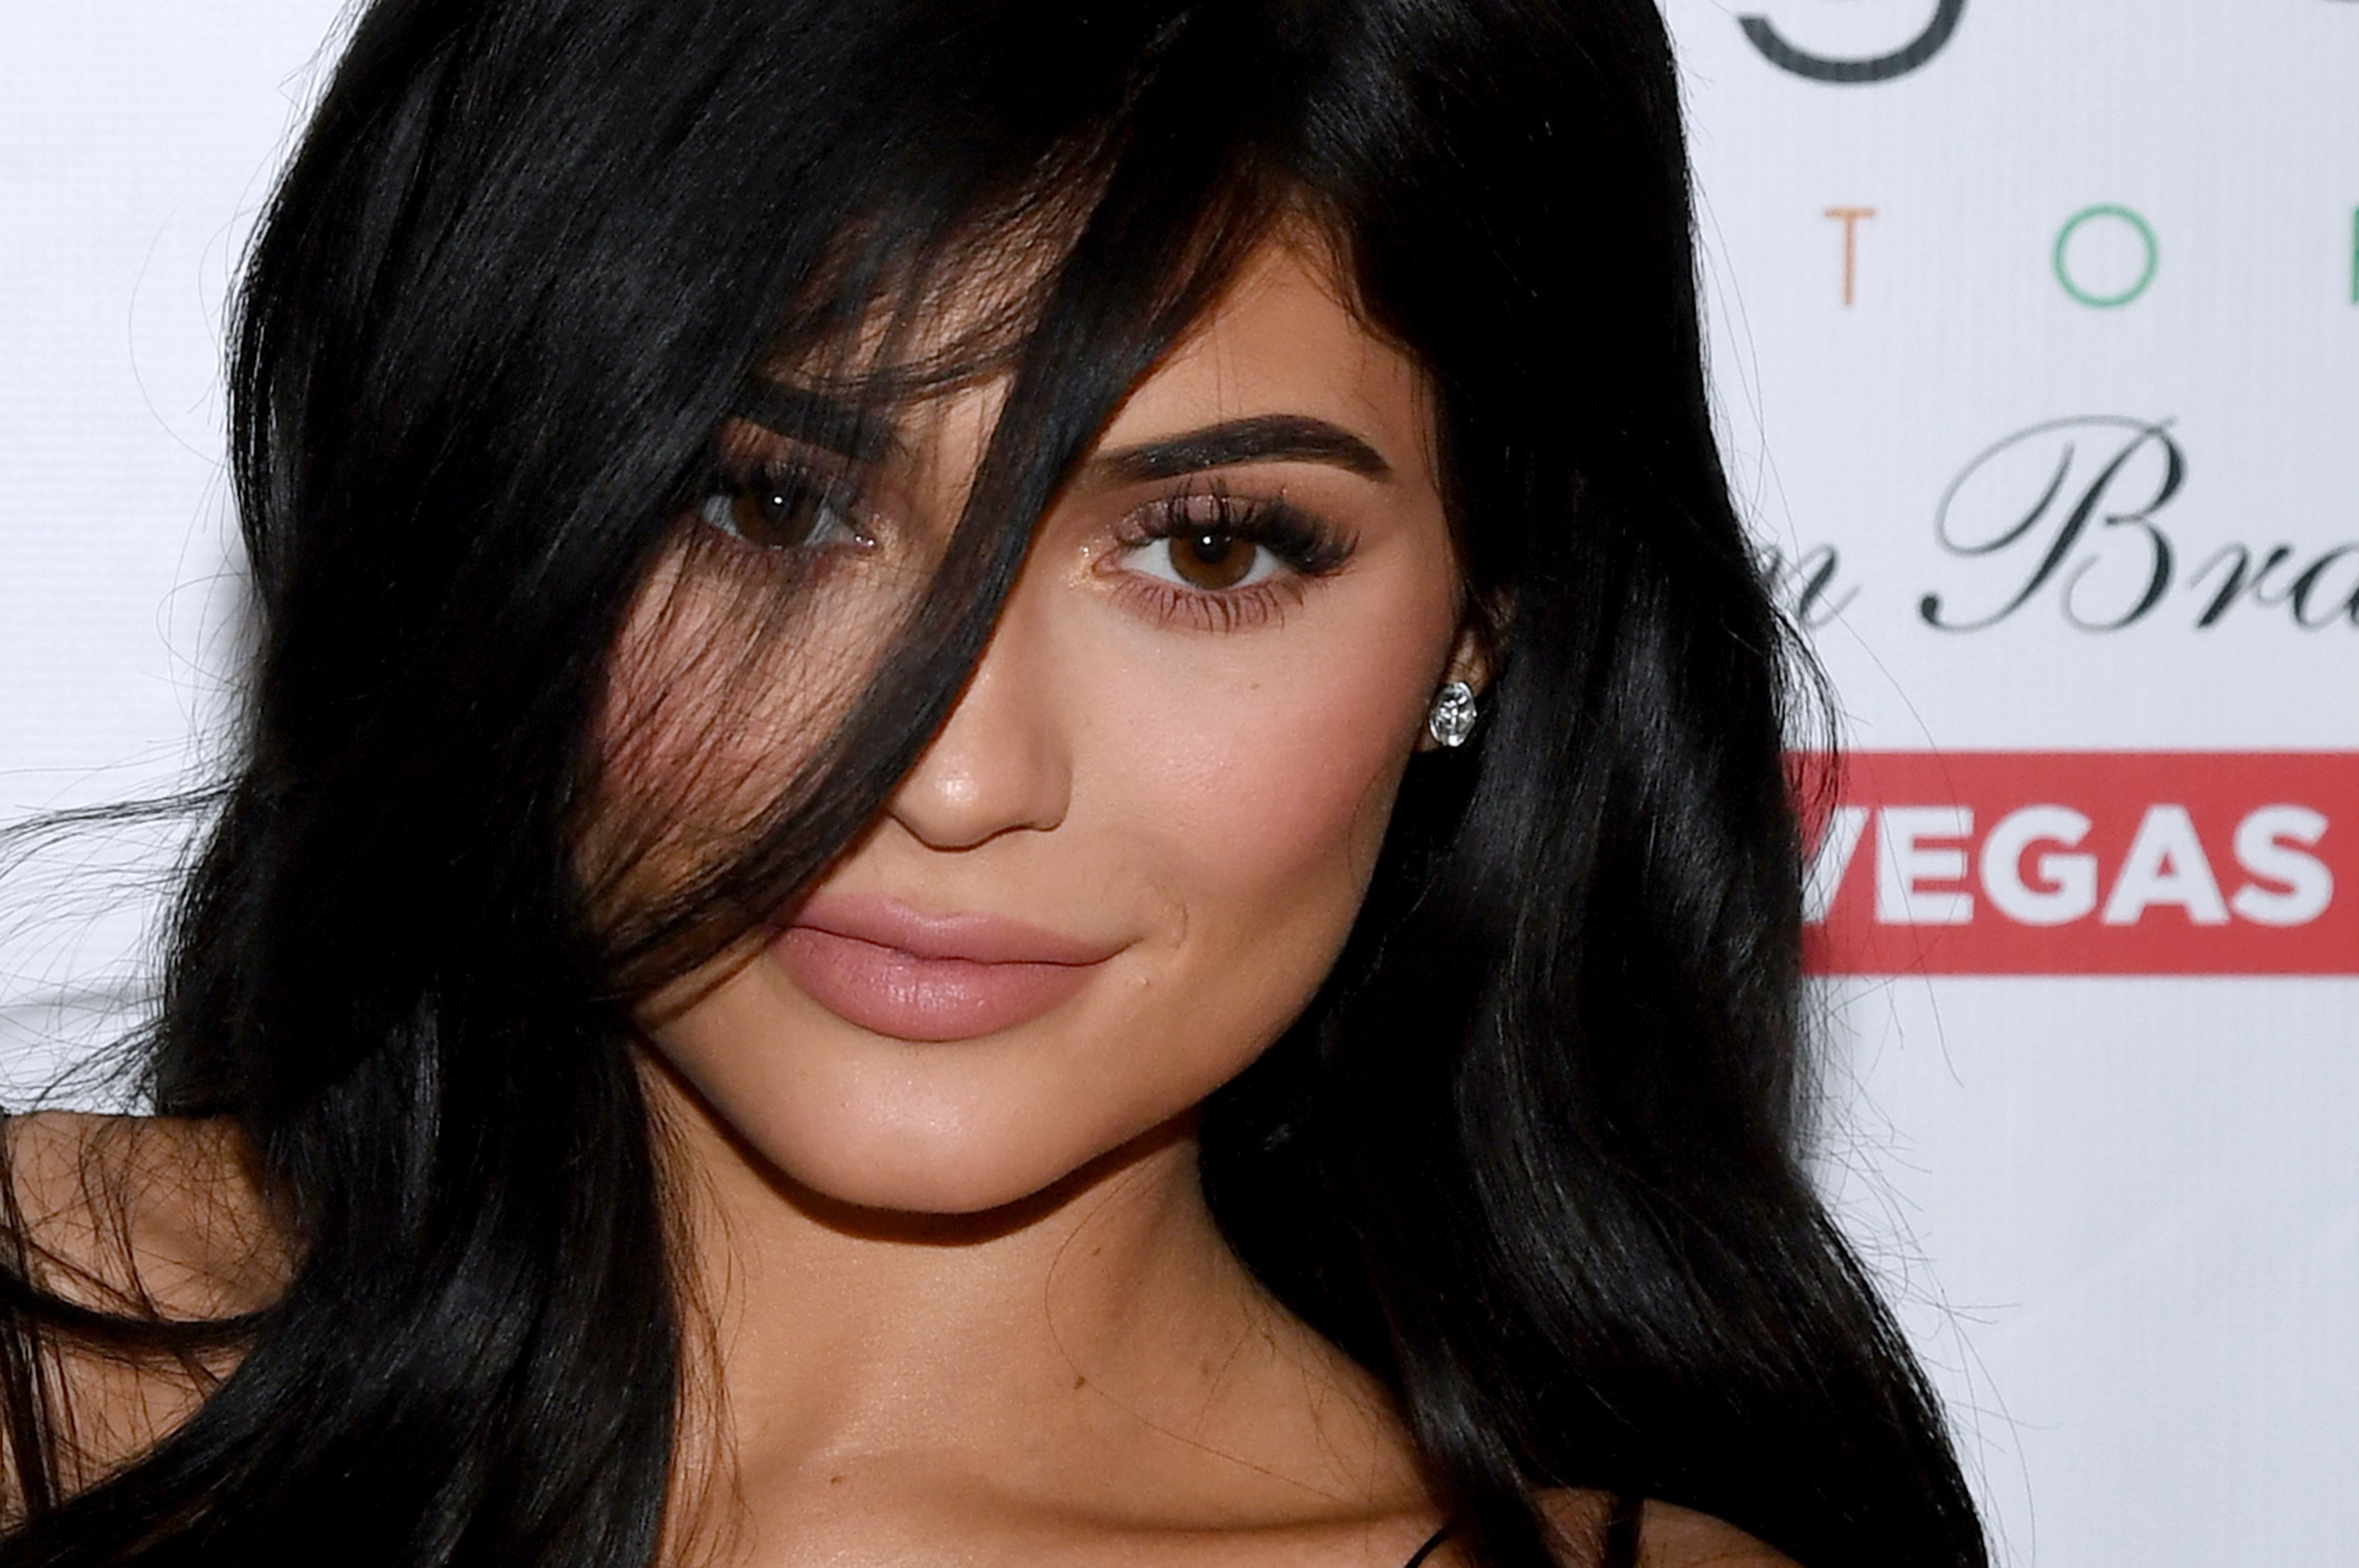 Kylie Jenner Suspected Of Breast Implants After Recent Instagram Pictures